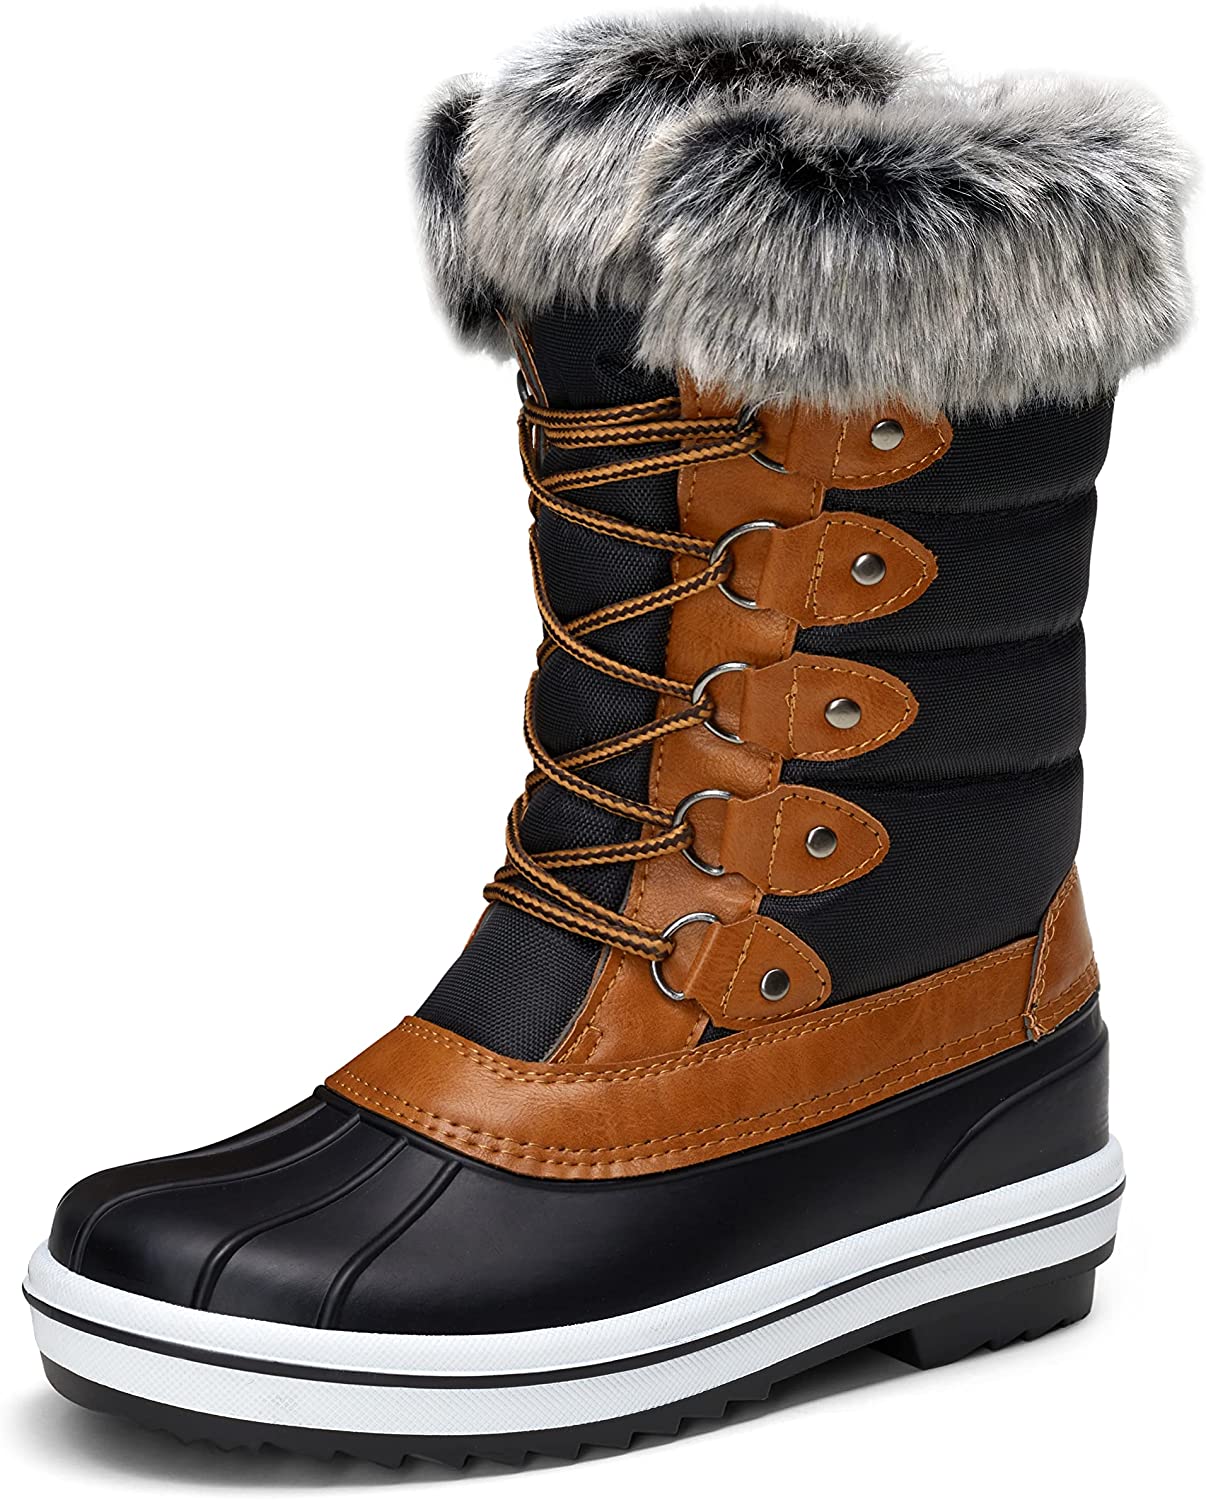 VEPOSE Women's Snow Boots Waterproof Mid Calf Lace Up Warm Winter Brown Booti... 